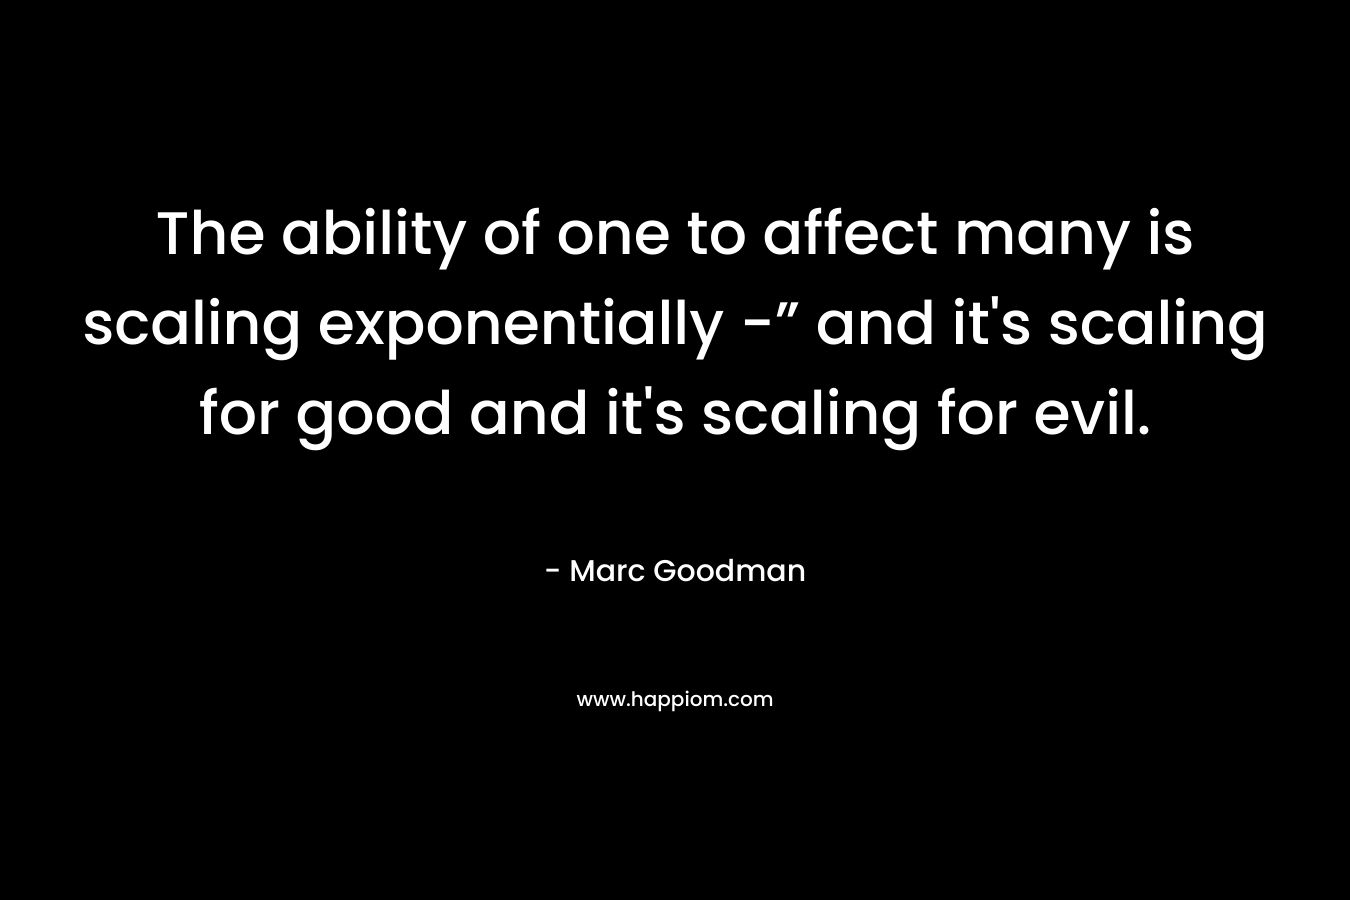 The ability of one to affect many is scaling exponentially -” and it’s scaling for good and it’s scaling for evil. – Marc Goodman